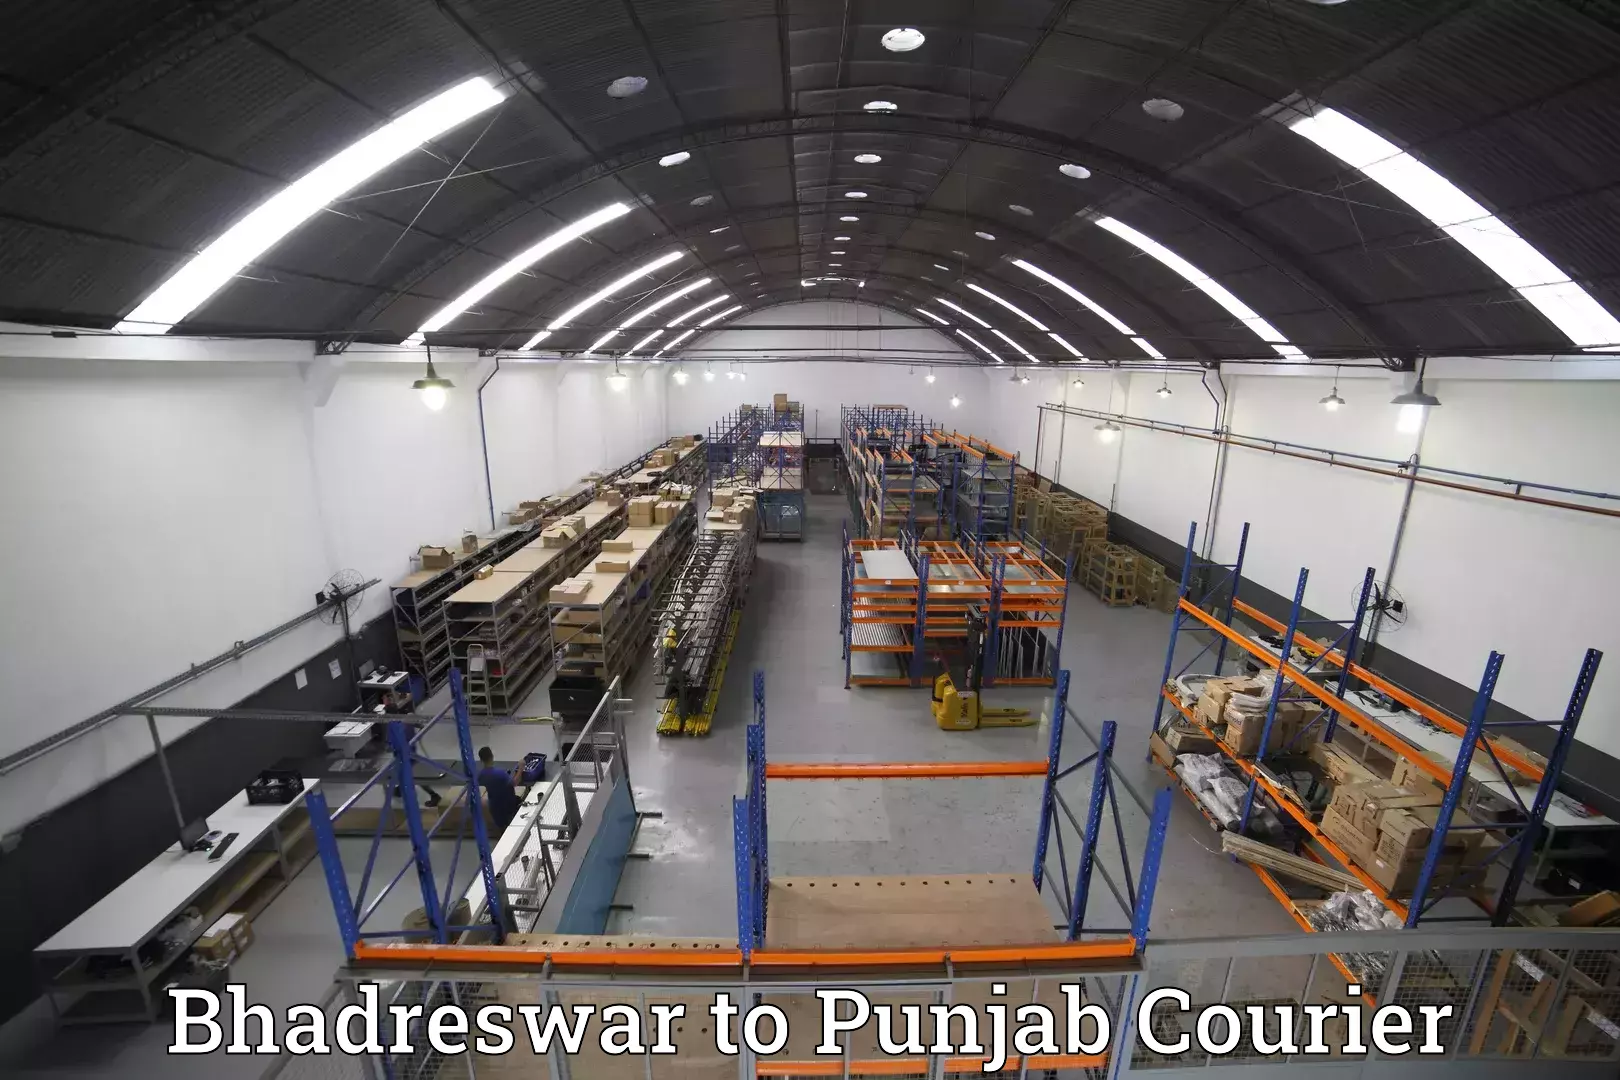 Luggage shipping specialists Bhadreswar to Punjab